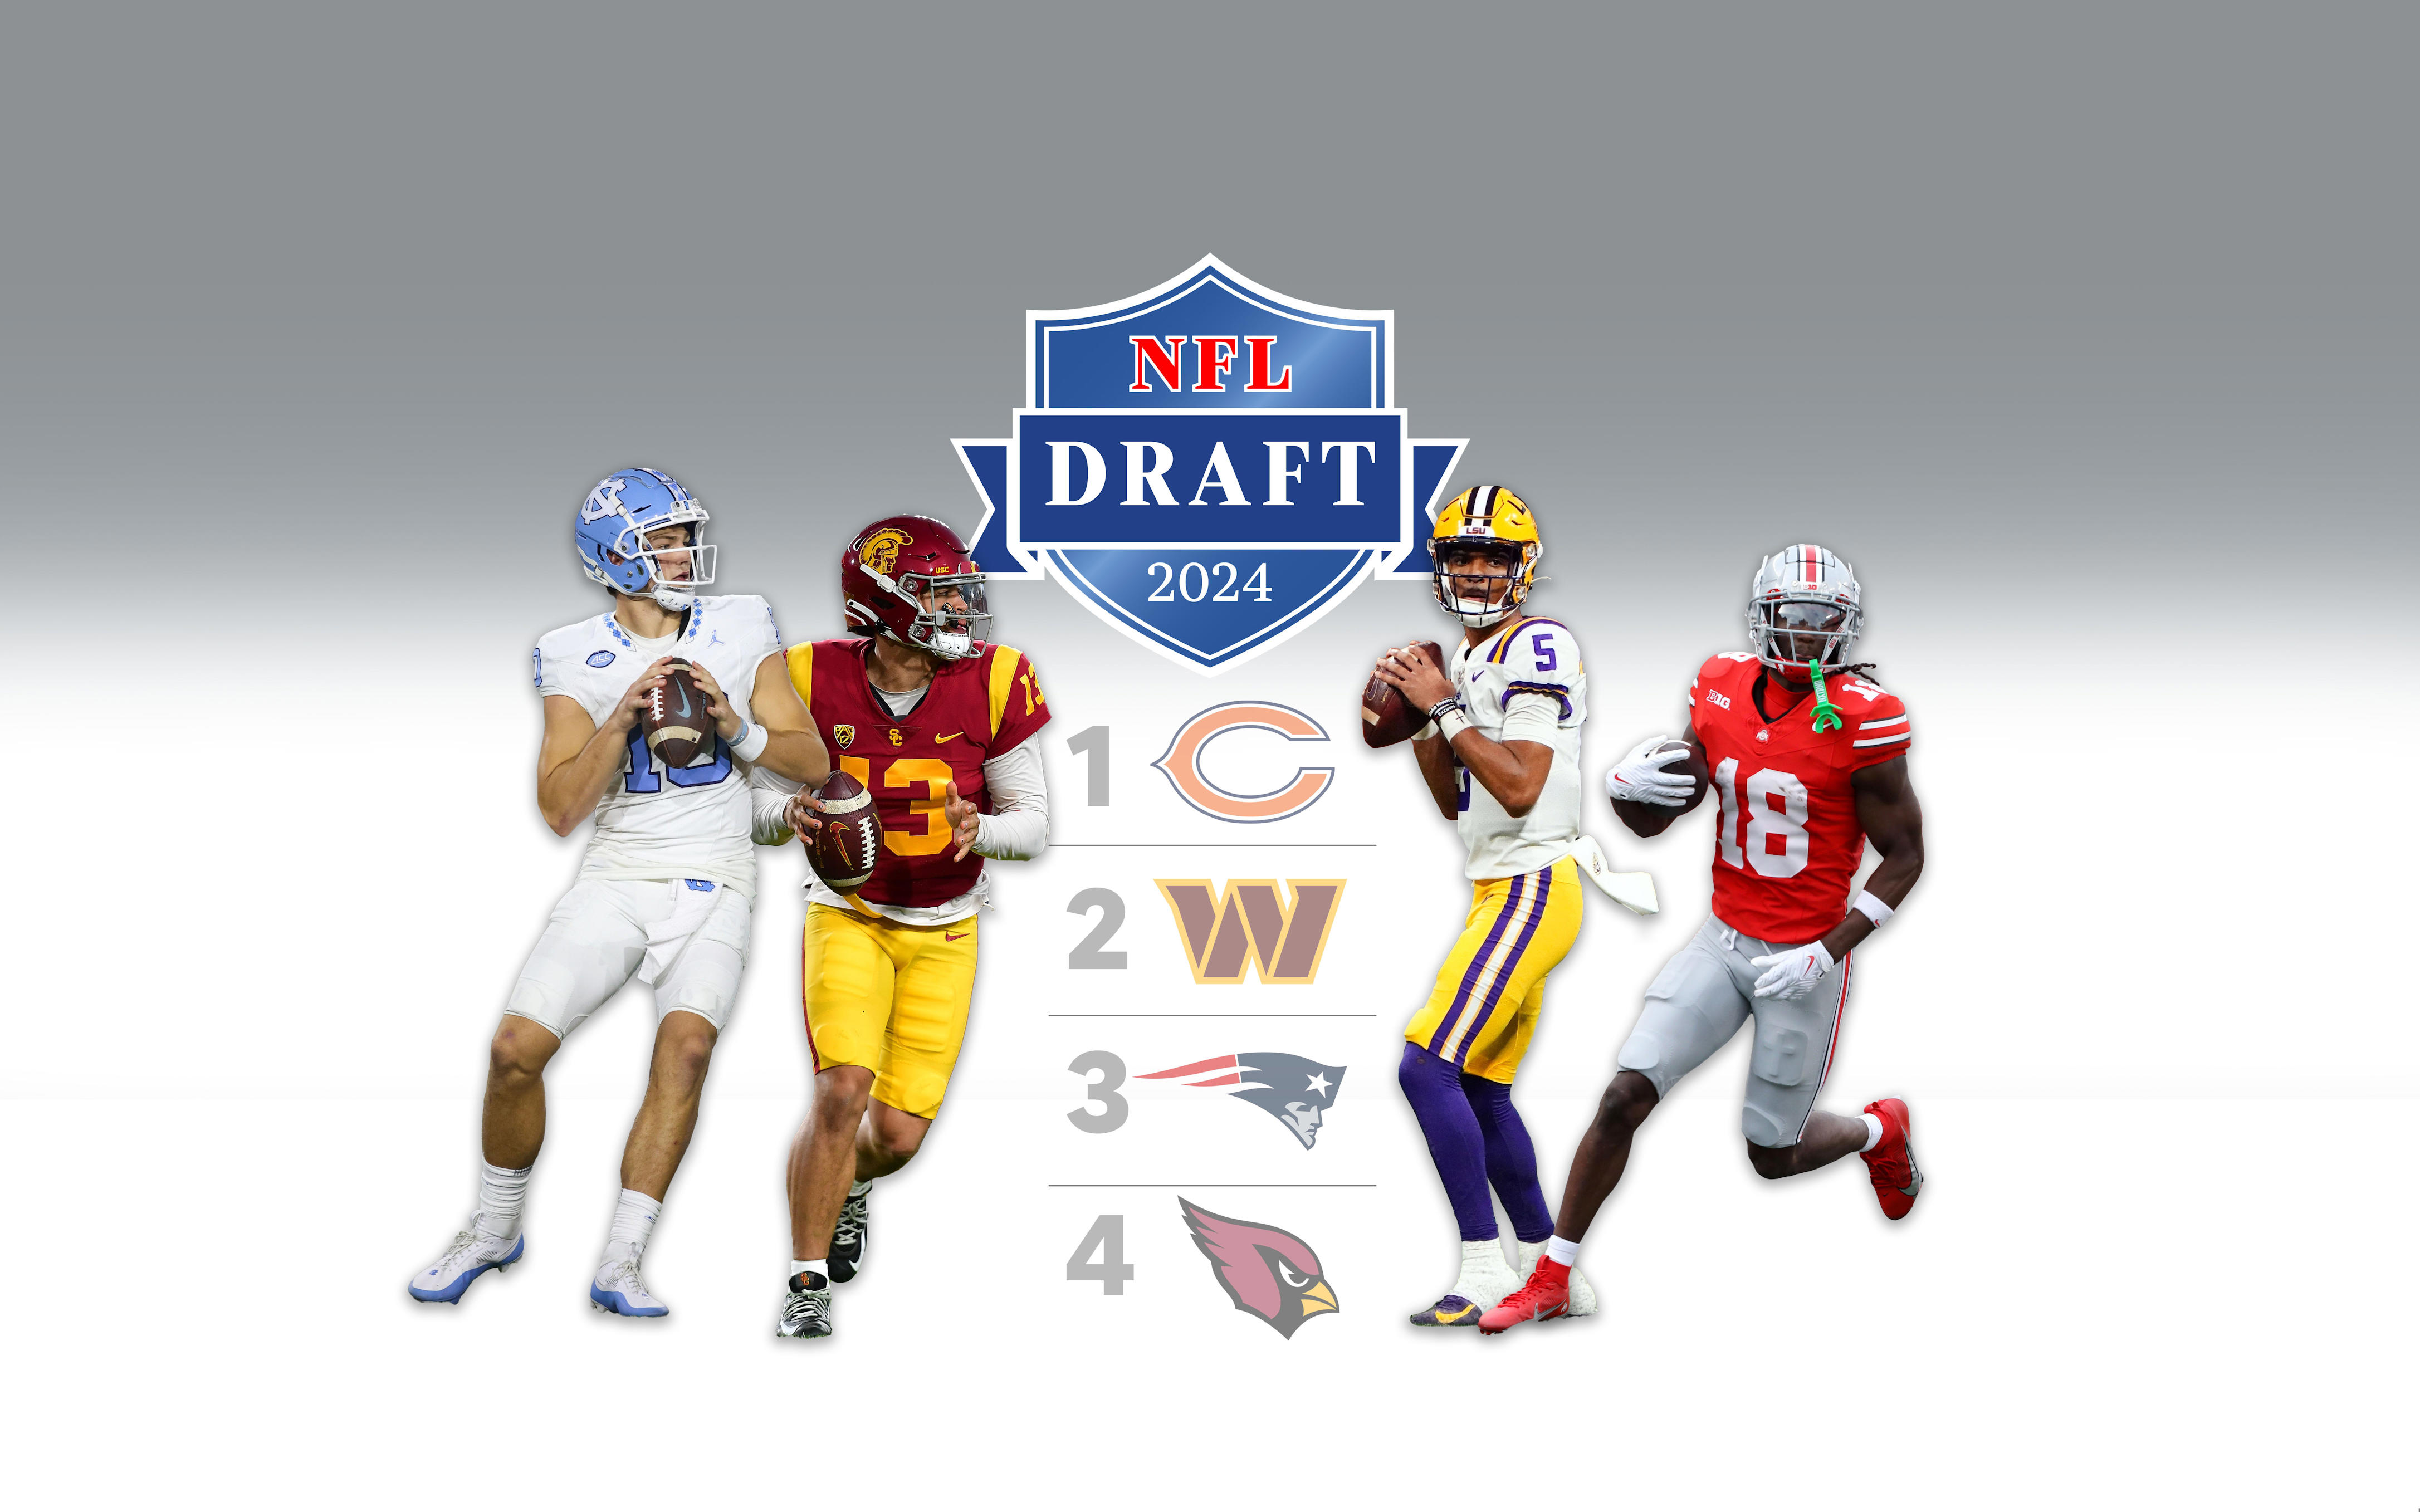 nfl mock draft: vikings trade up for qb, bills move up for wr in latest predictions